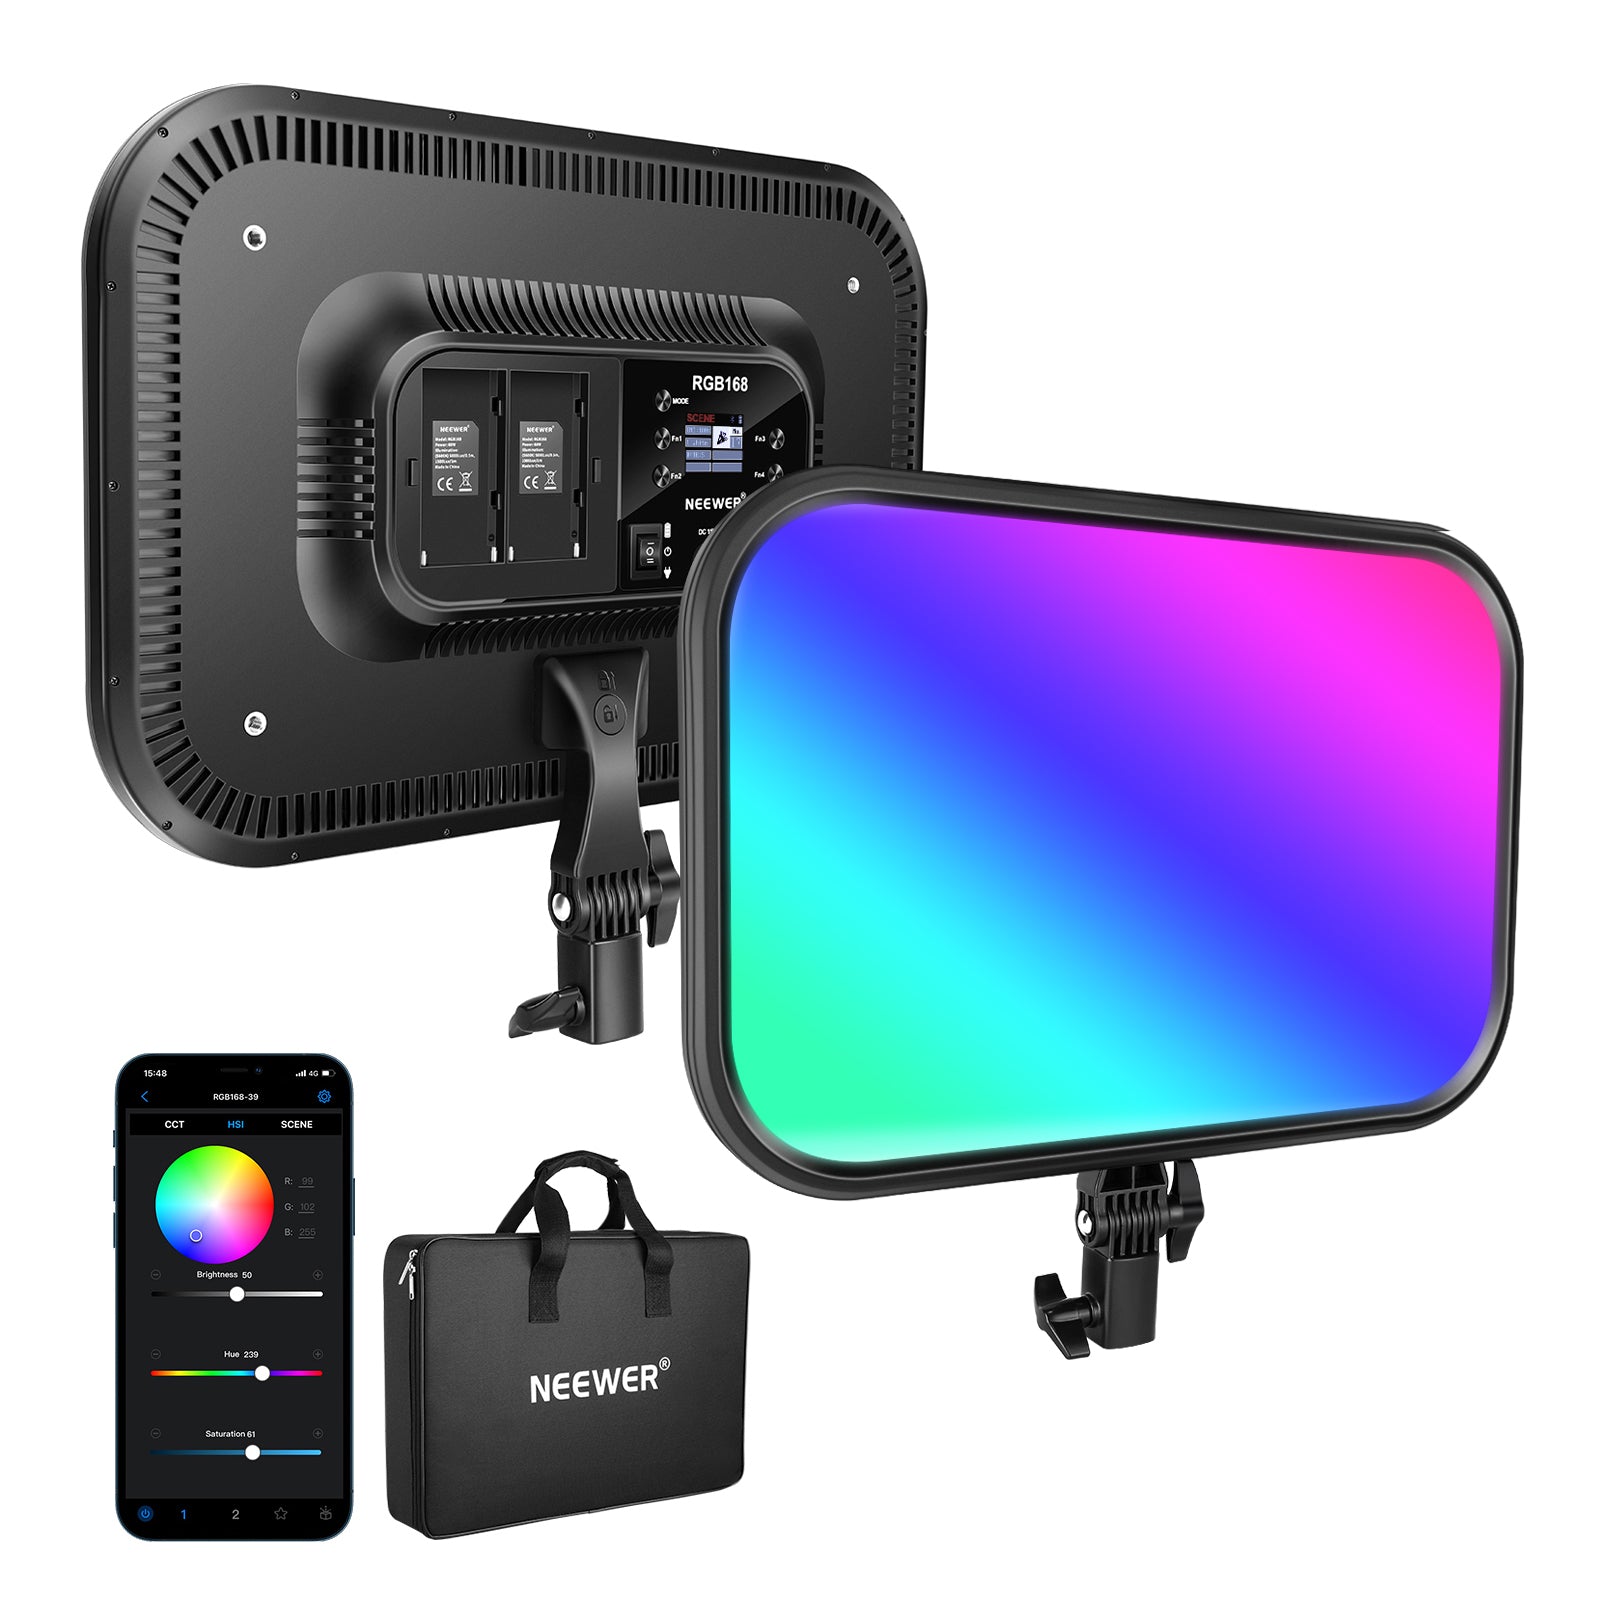 NEEWER RGB168 18.3 Inches LED Panel Video Light - NEEWER